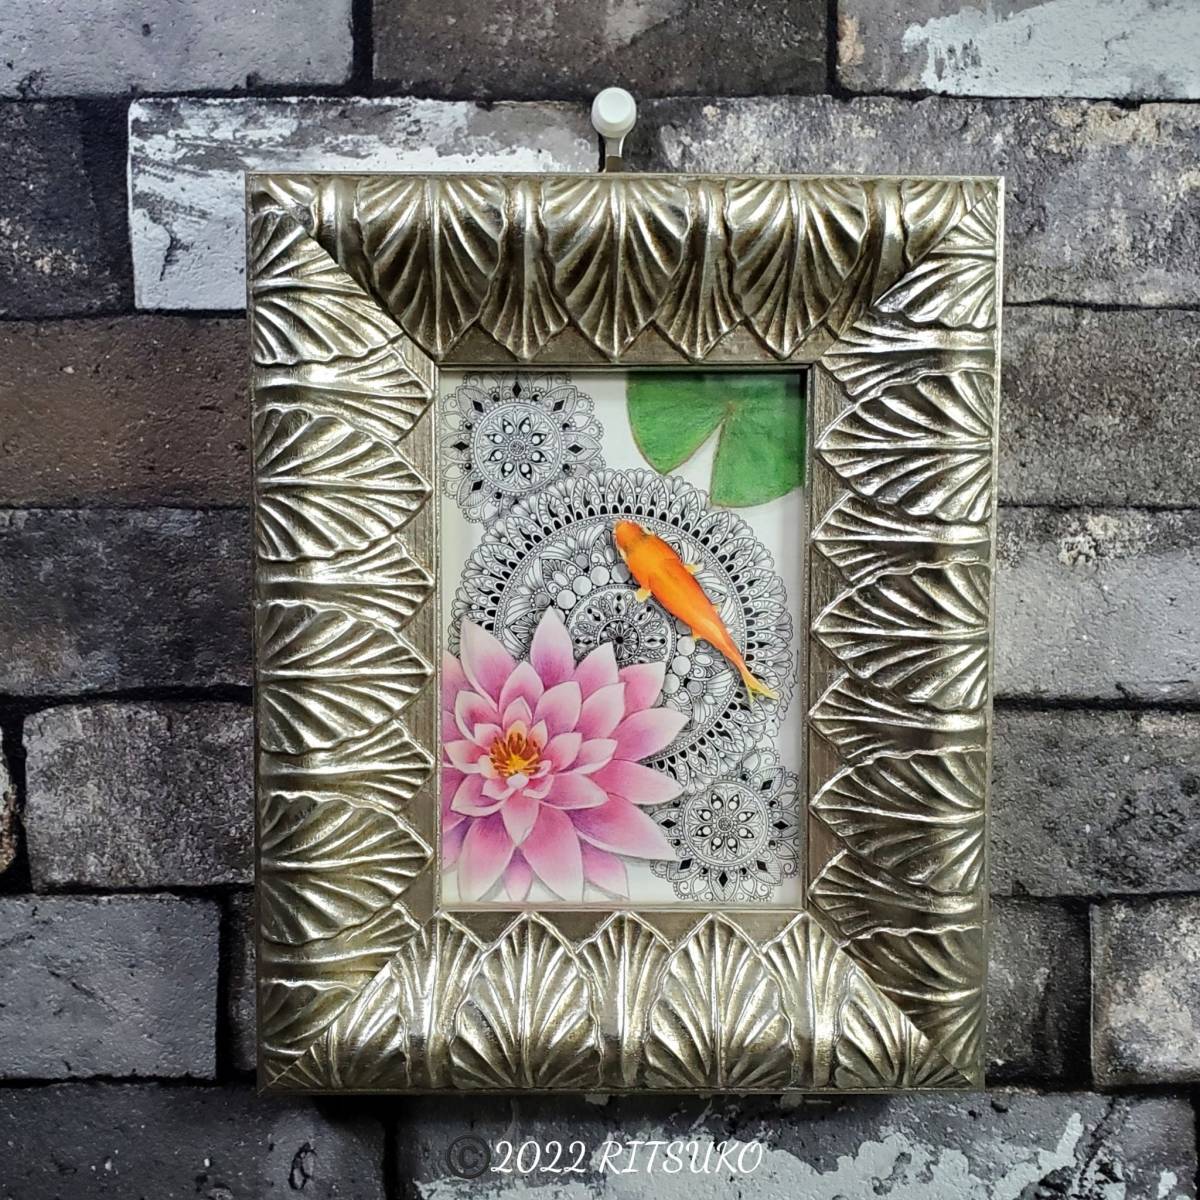 Original one-of-a-kind framed colored pencil drawing ballpoint pen drawing Japanese artist goldfish flower framed 18cm x 23cm Painting Art Interior Good luck Increase your luck, artwork, painting, others